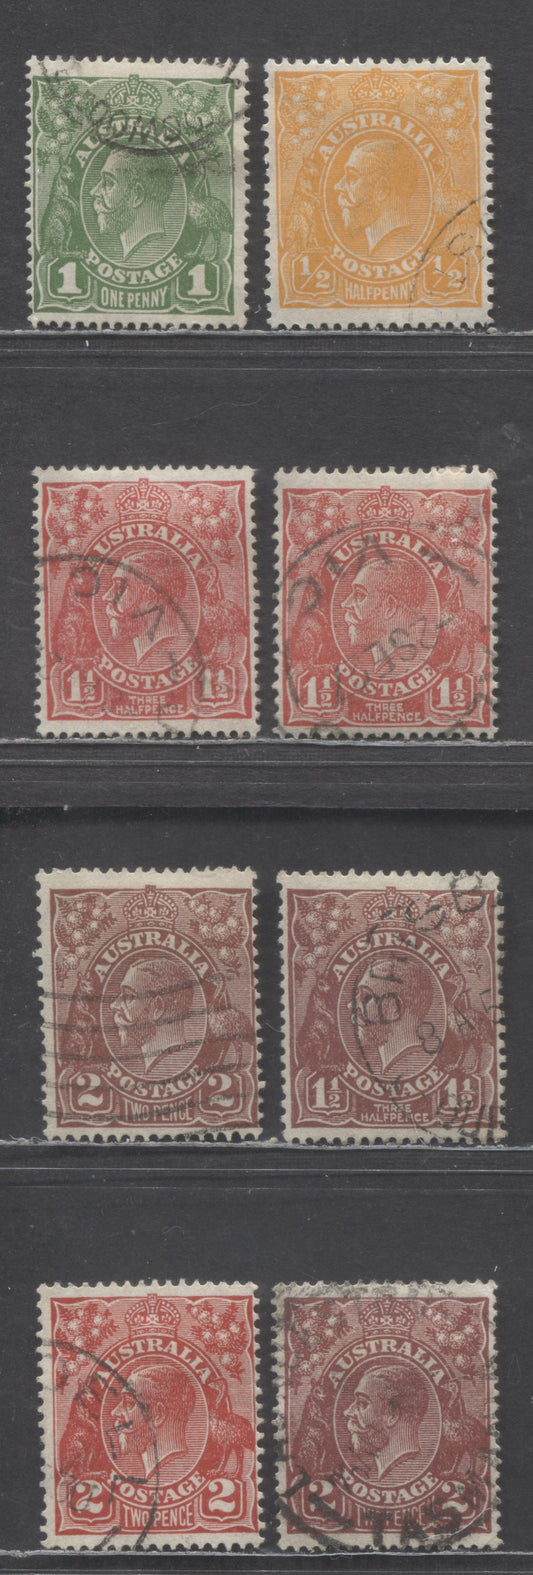 Lot 67 Australia SC#66-71 1926-1930 King George V Profile Heads Issue, Perfs 14 & 13.5x12.5, Small Multiple Wmk, 8 Fine/Very Fine Used Singles, Click on Listing to See ALL Pictures, Estimated Value $30